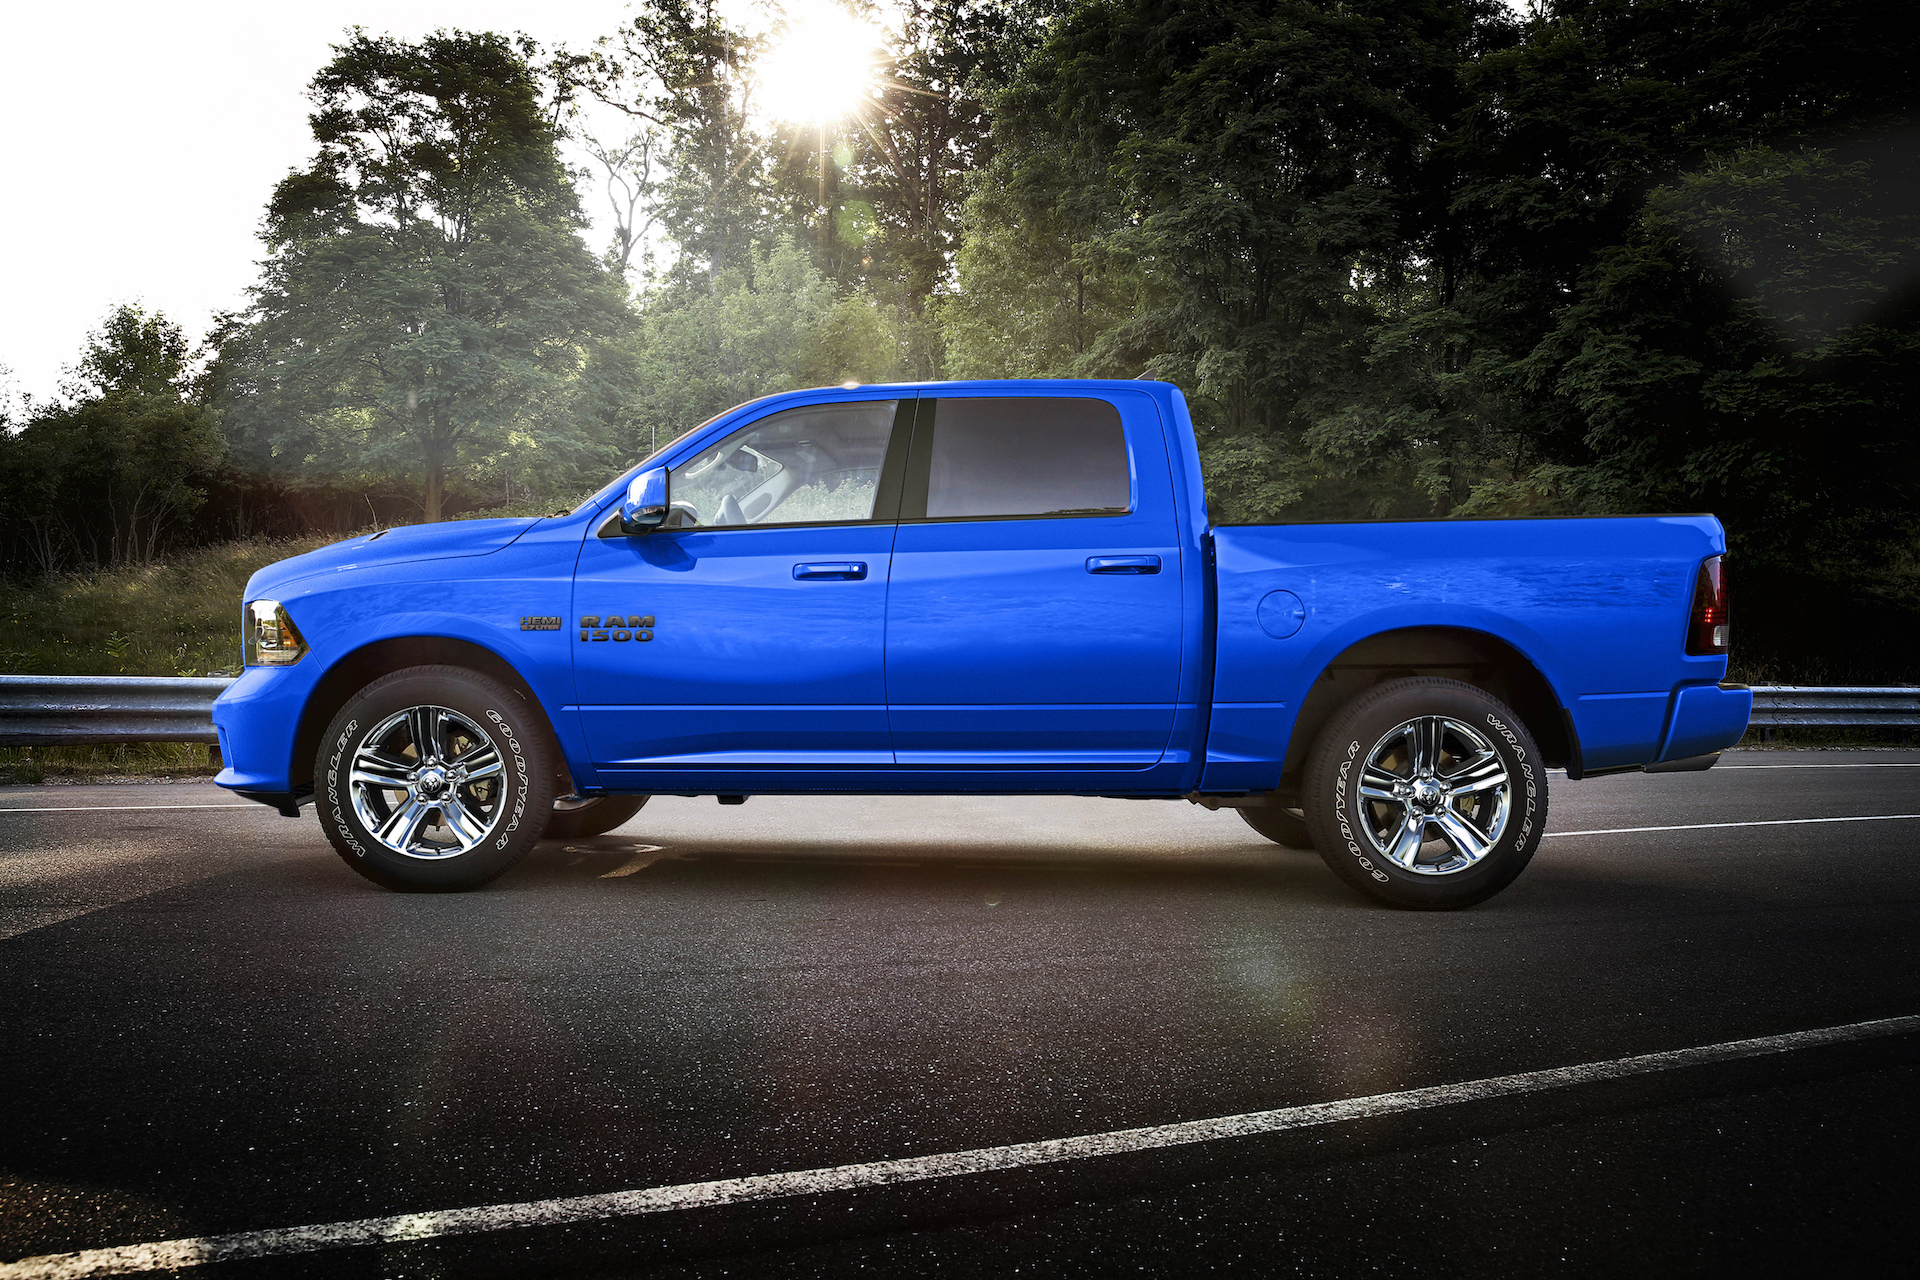 2018 Ram 1500 Review, Specs, Prices, Photos - The Car Connection